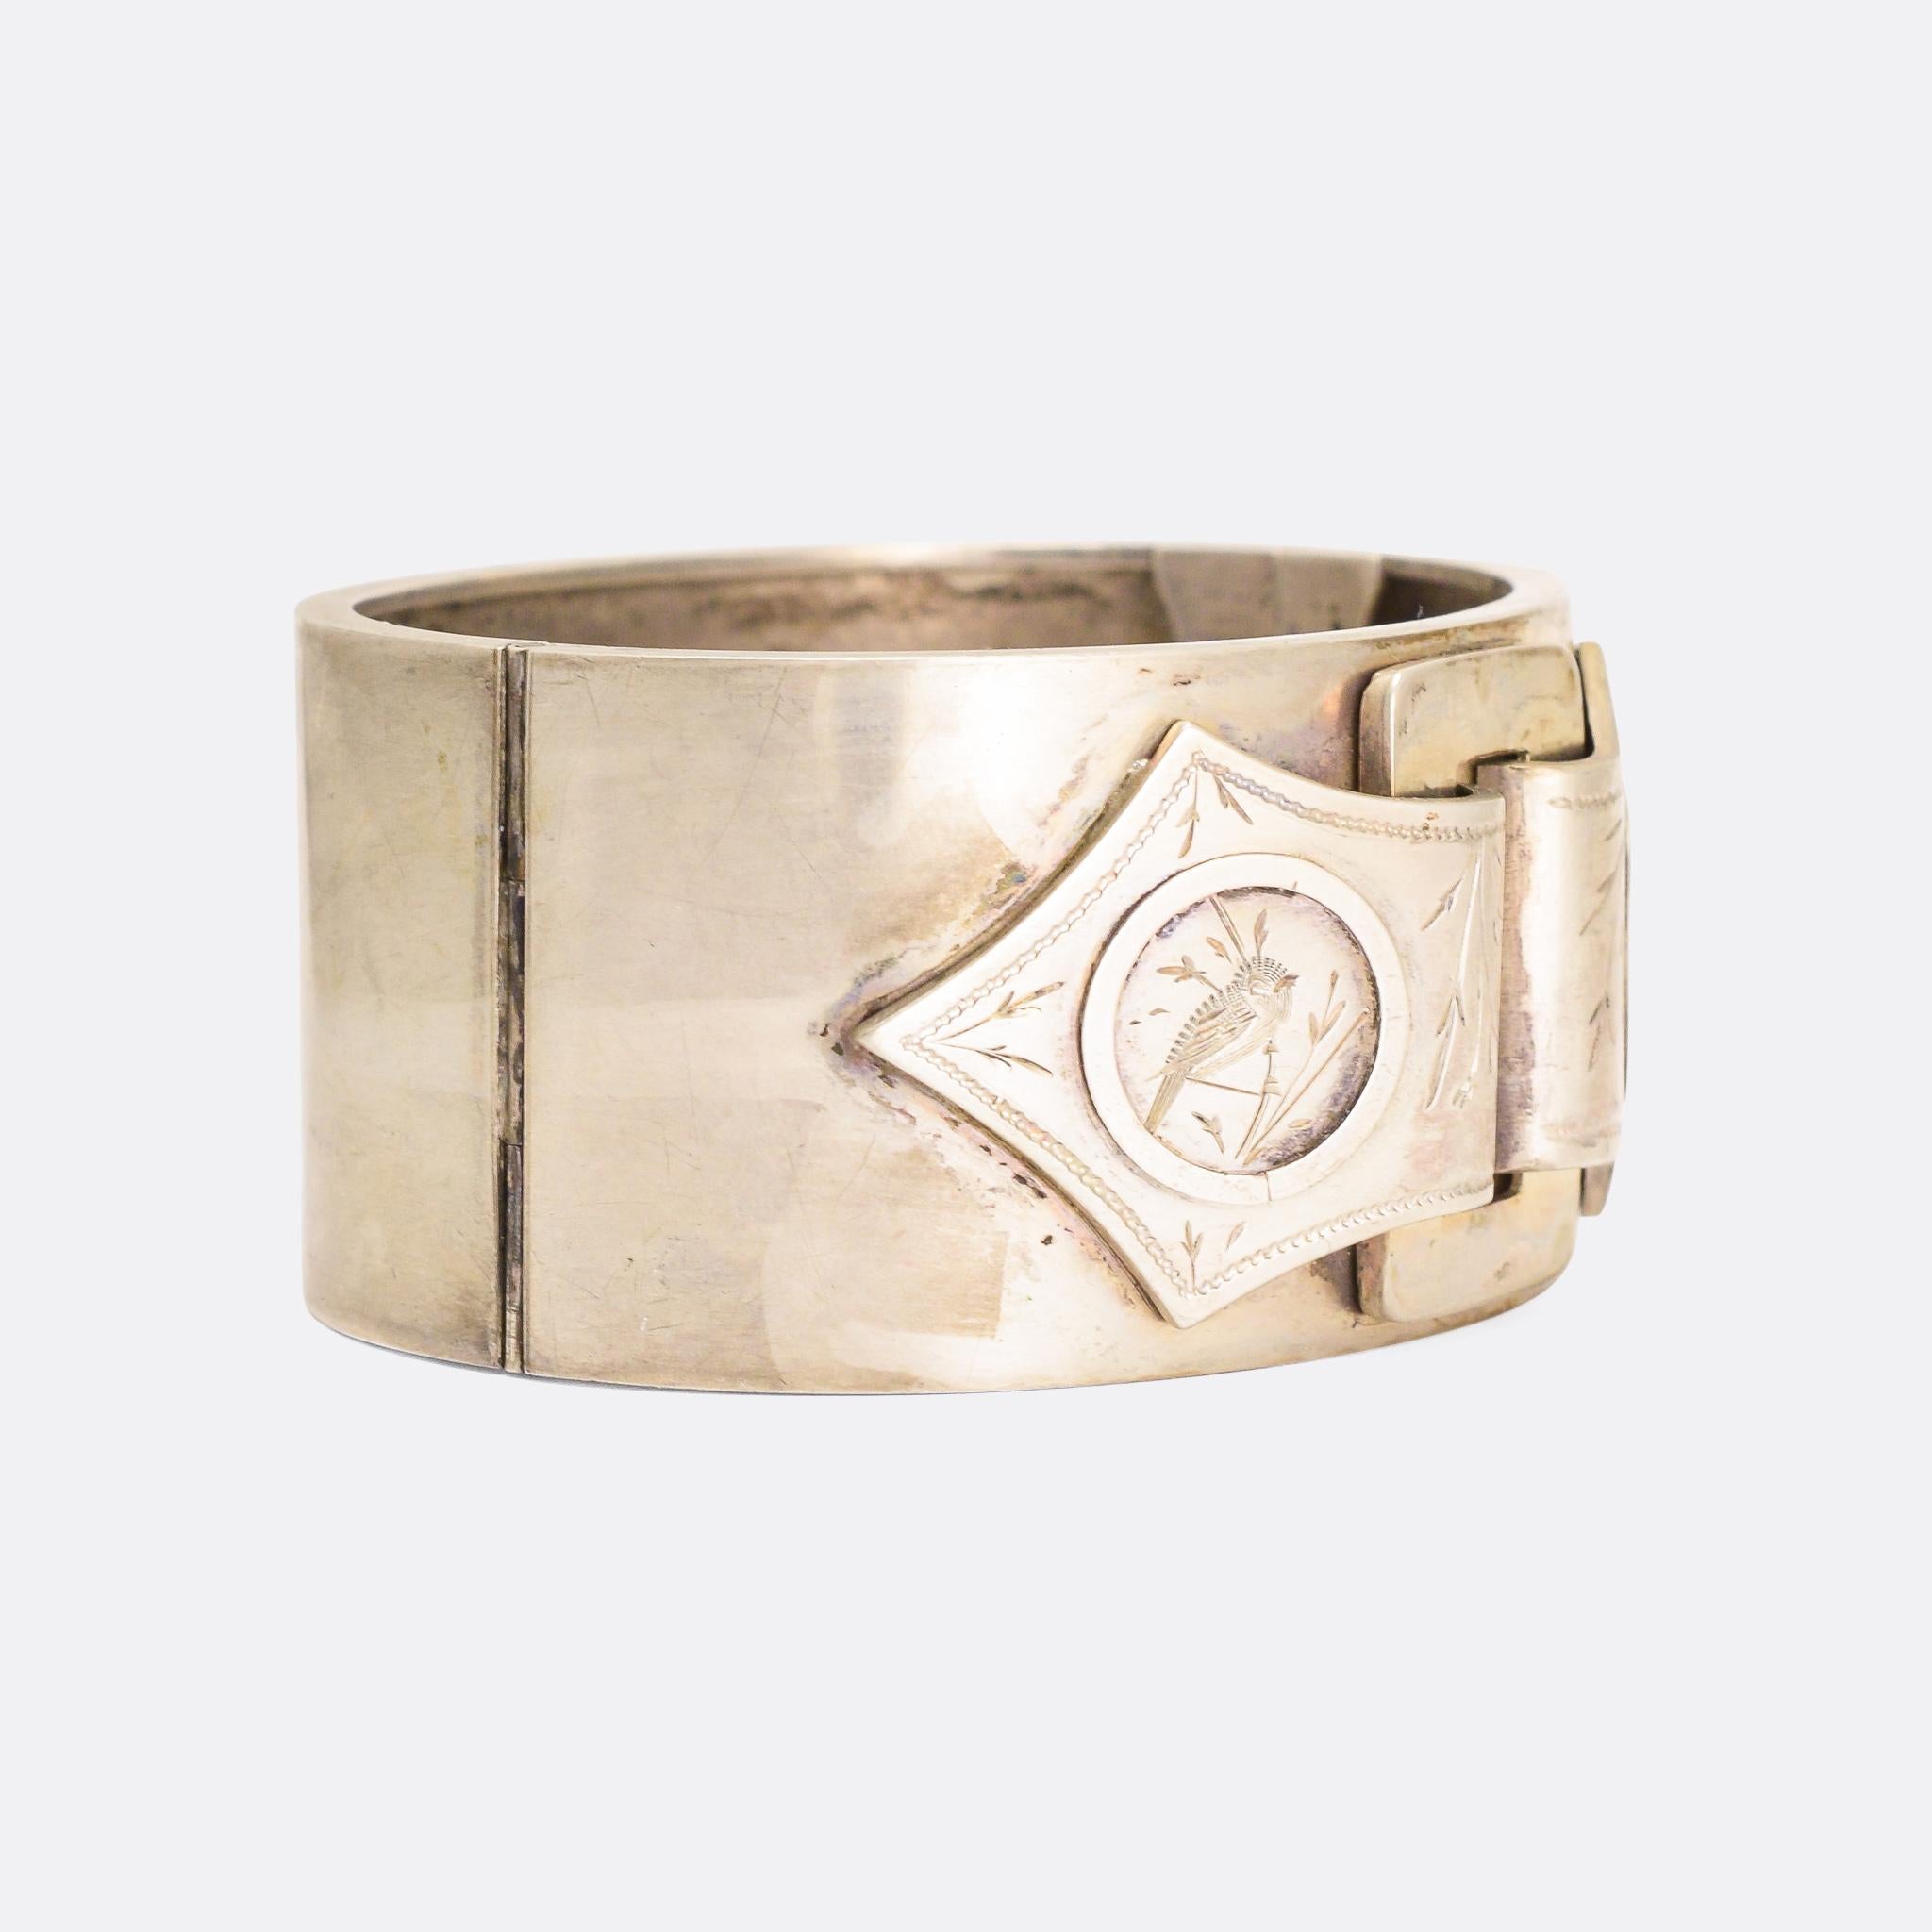 An unusual Aesthetic Movement silver cuff bangle dating from the 1880s. It features a buckle design, that has been delicately hand-chased with Japanese style birds and foliage. Modelled in Sterling Silver.

MEASUREMENTS 
Width: 3.2cm
To fit wrist: